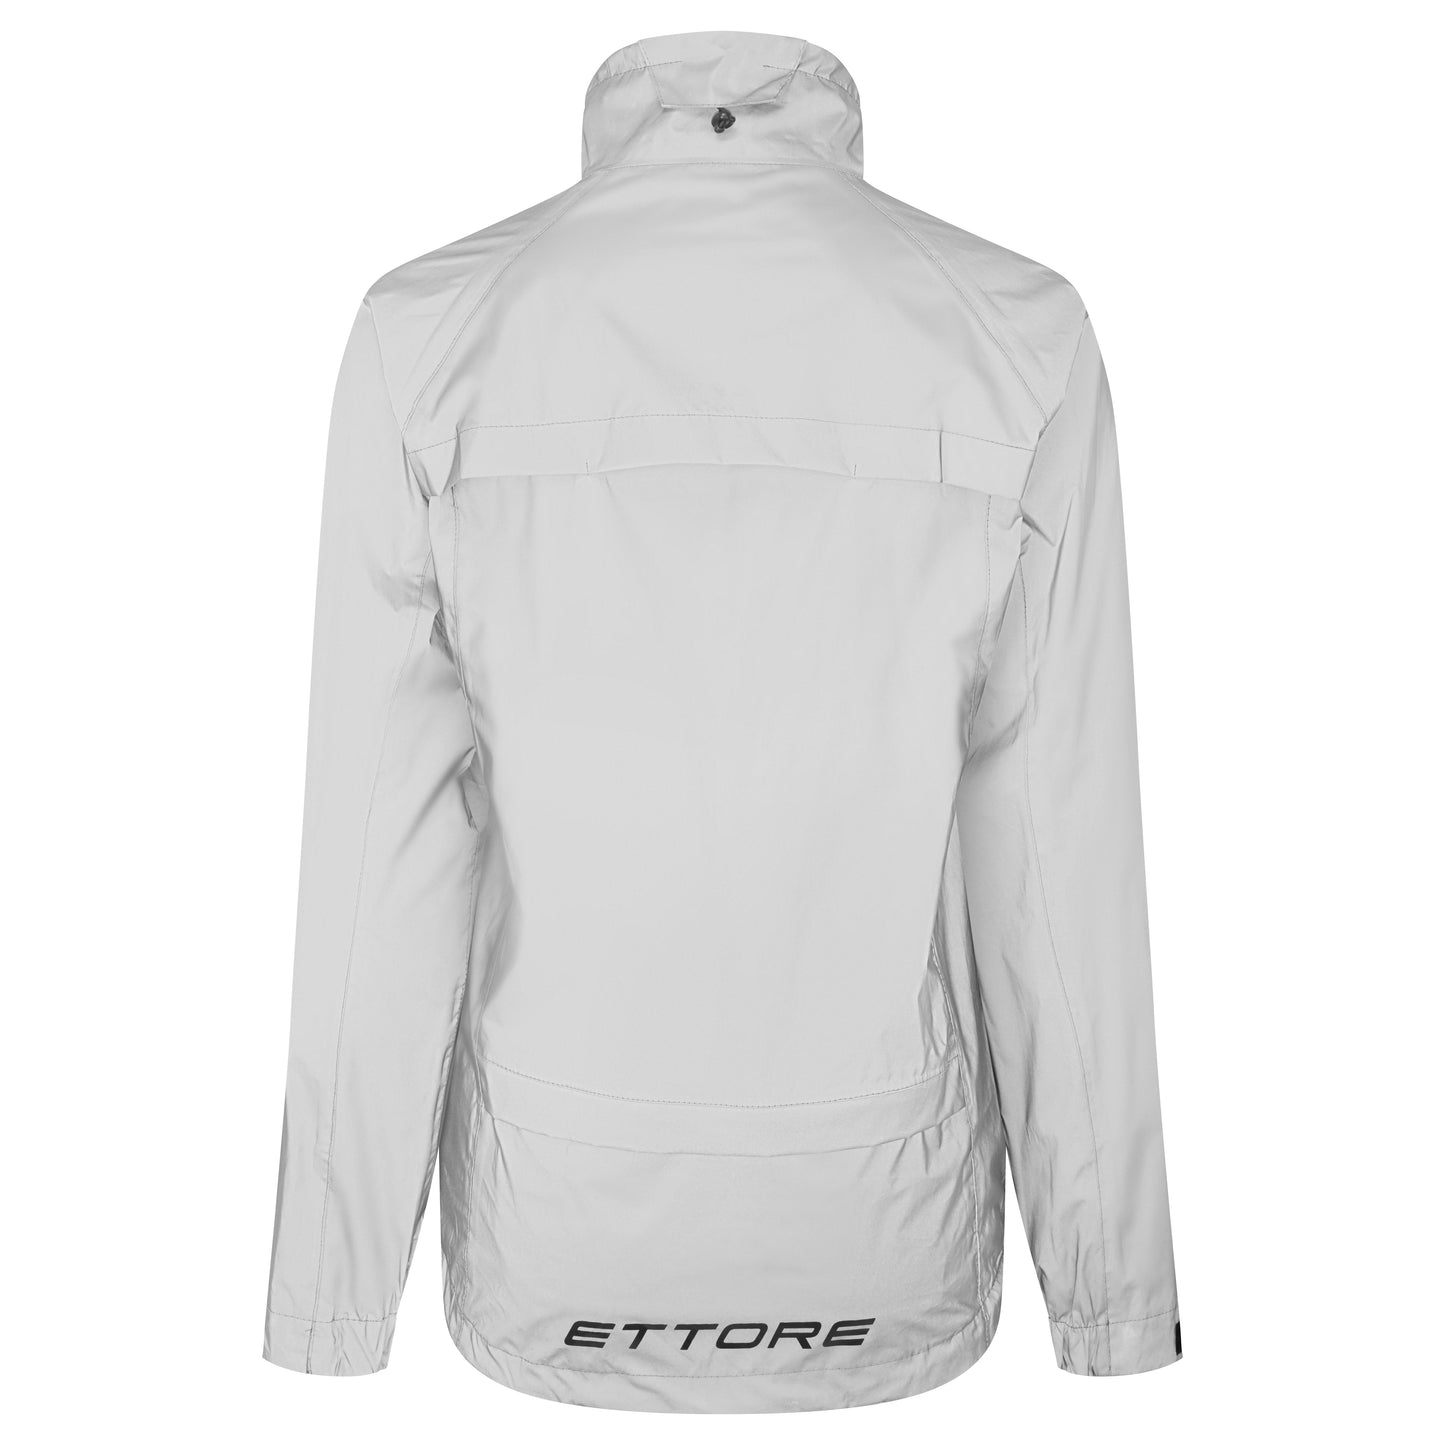 Ettore Night Glow Ladies Waterproof Breathable High Visibility Reflective Silver Cycling Jacket